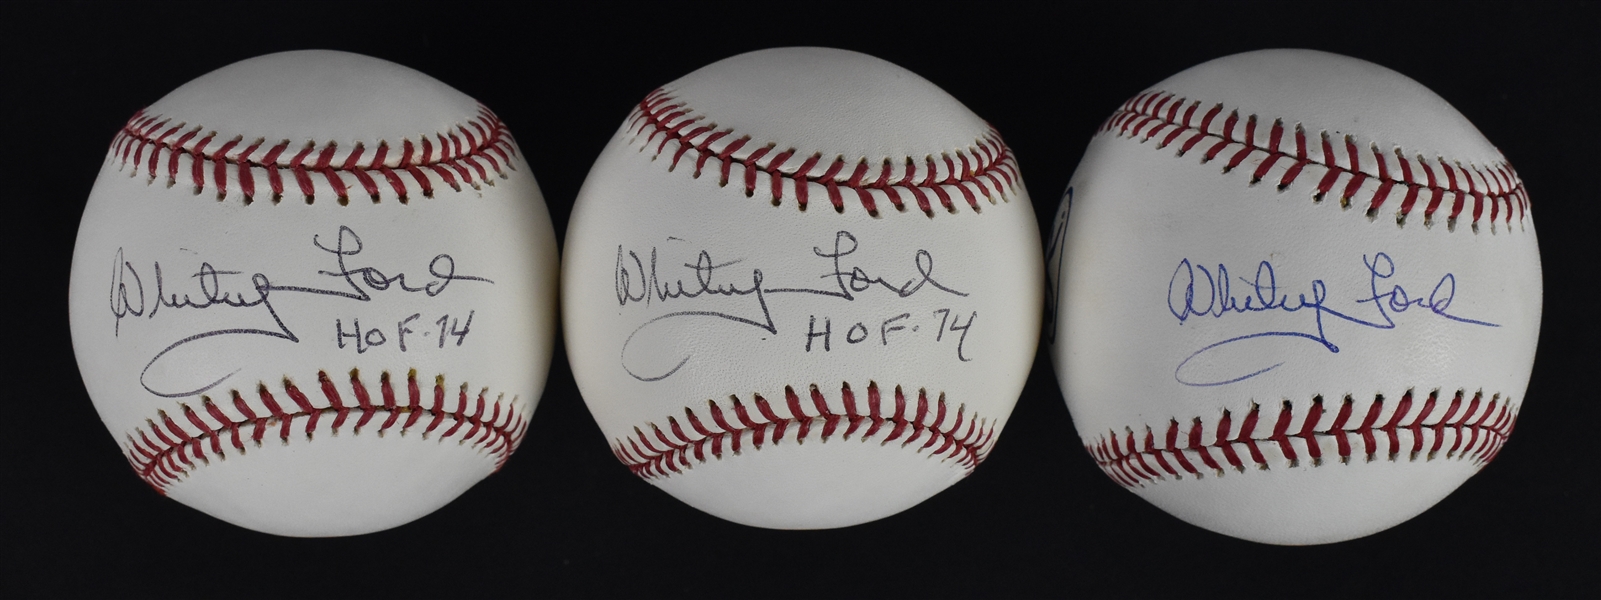 Collection of 3 Autographed Baseballs w/Whitey Ford